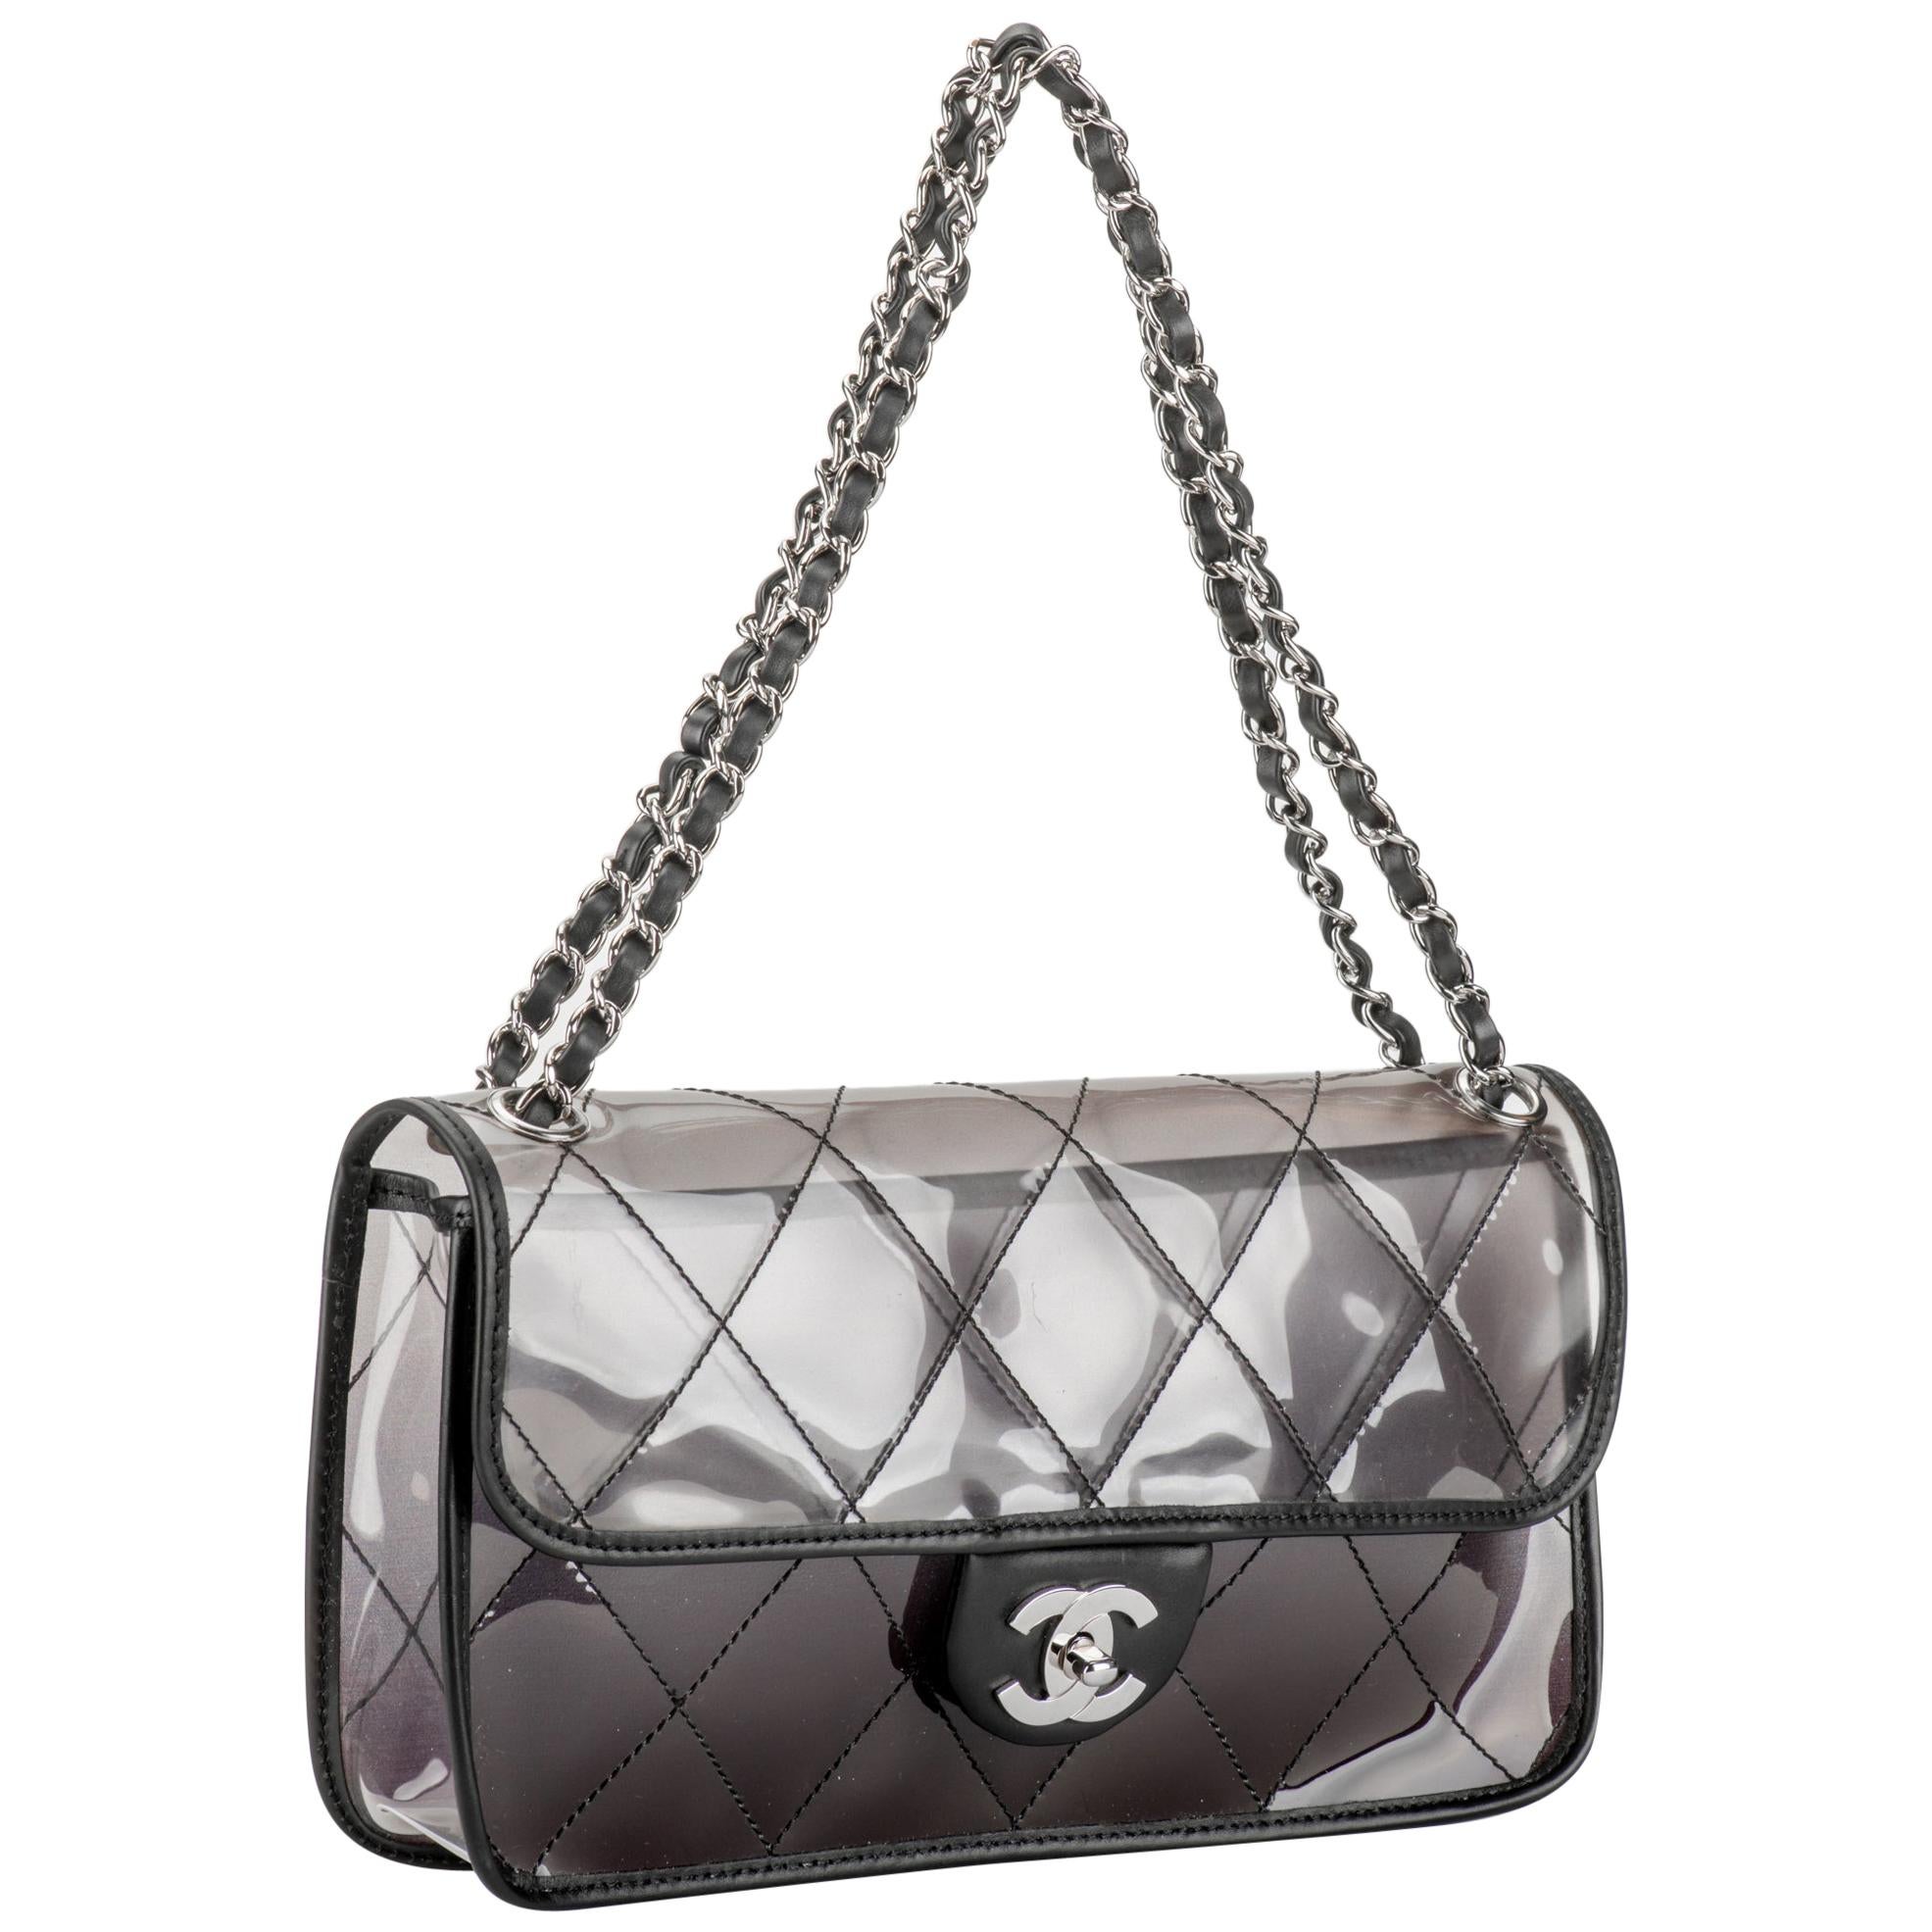 New in Box Chanel PVC Flap With Leather Trim Bag